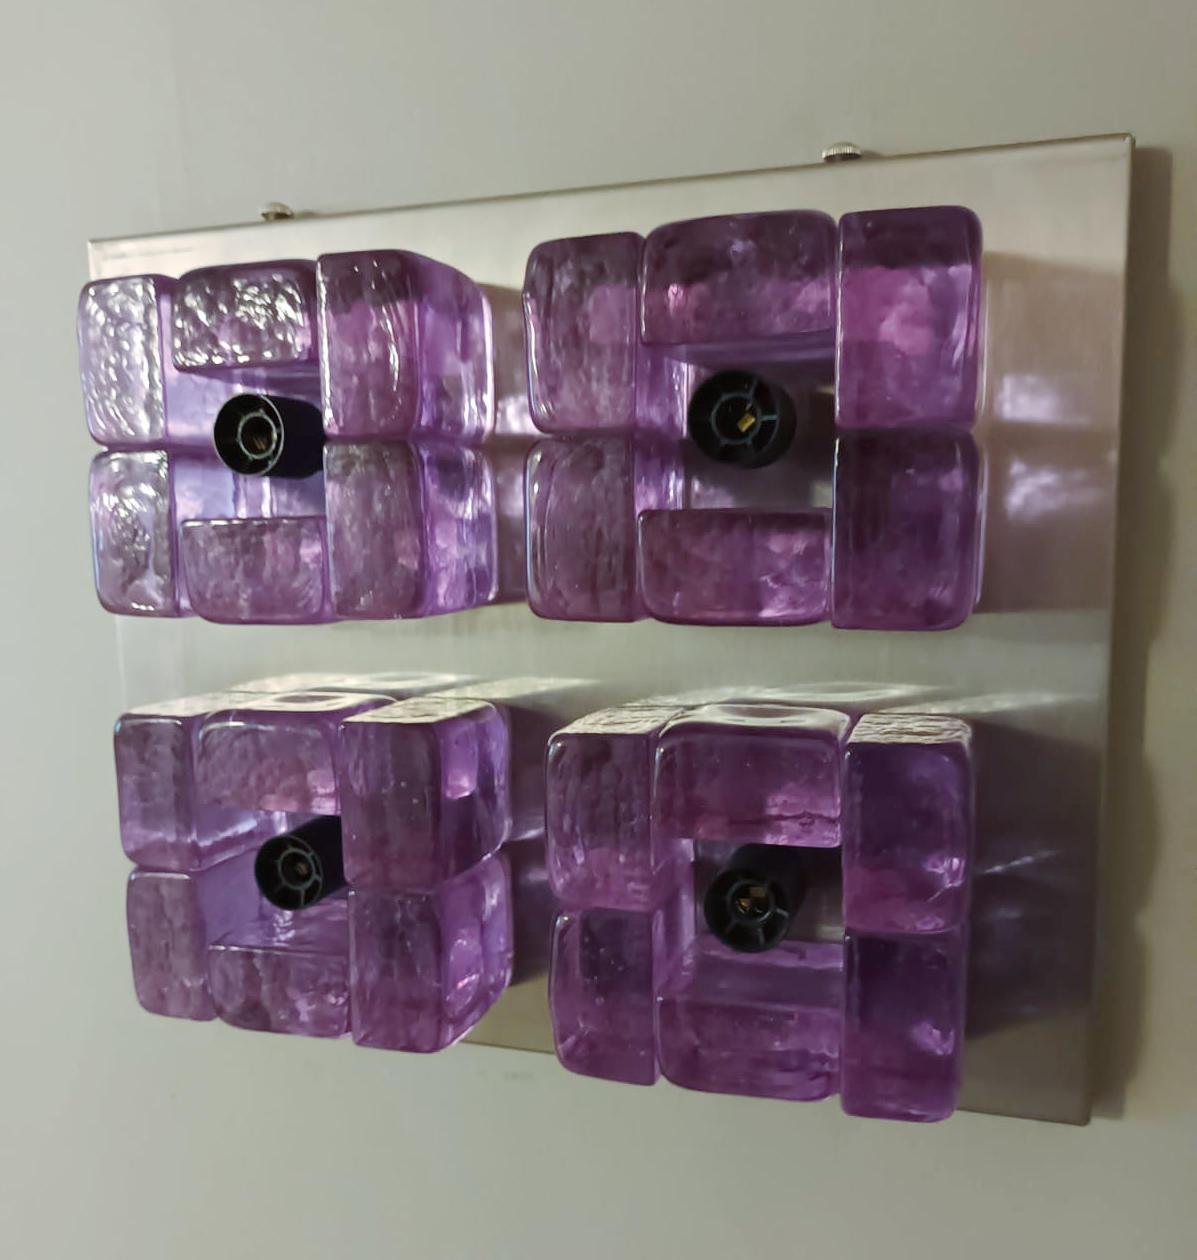 Italian Amethyst Cube Sconces / Flush Mounts by Poliarte - 3 Available For Sale